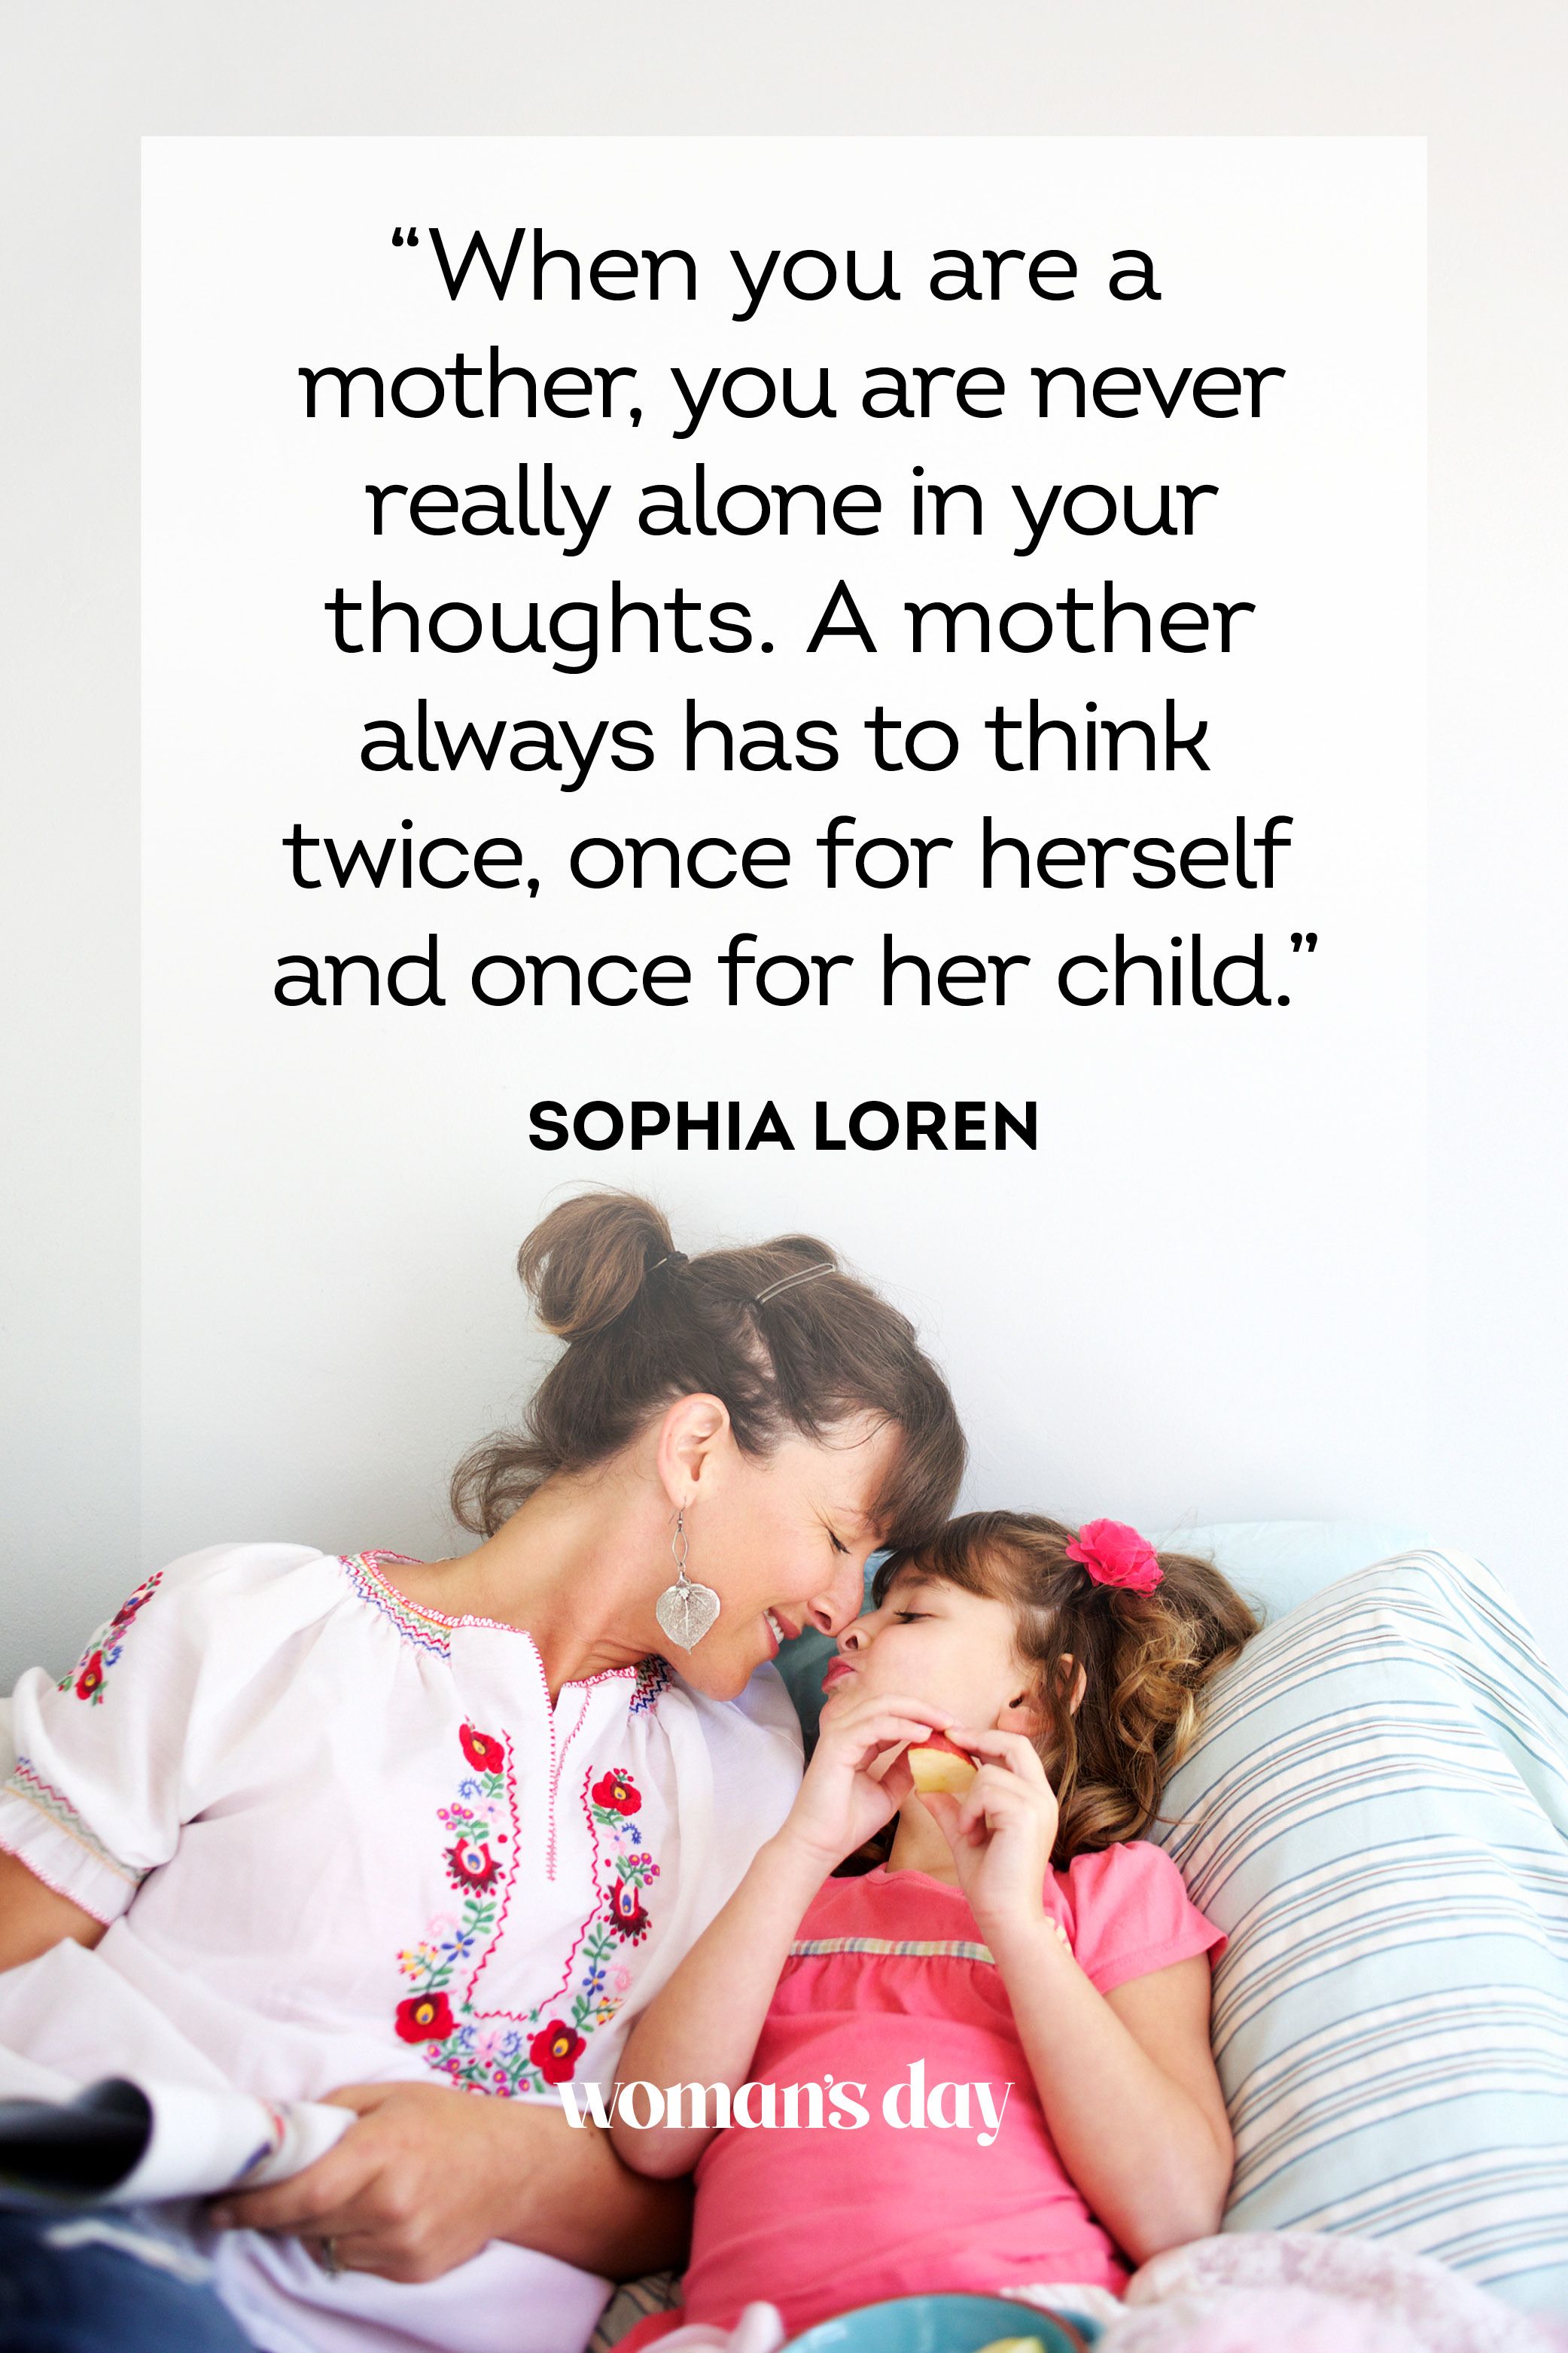 60 Best Mother Daughter Quotes 2023 photo image